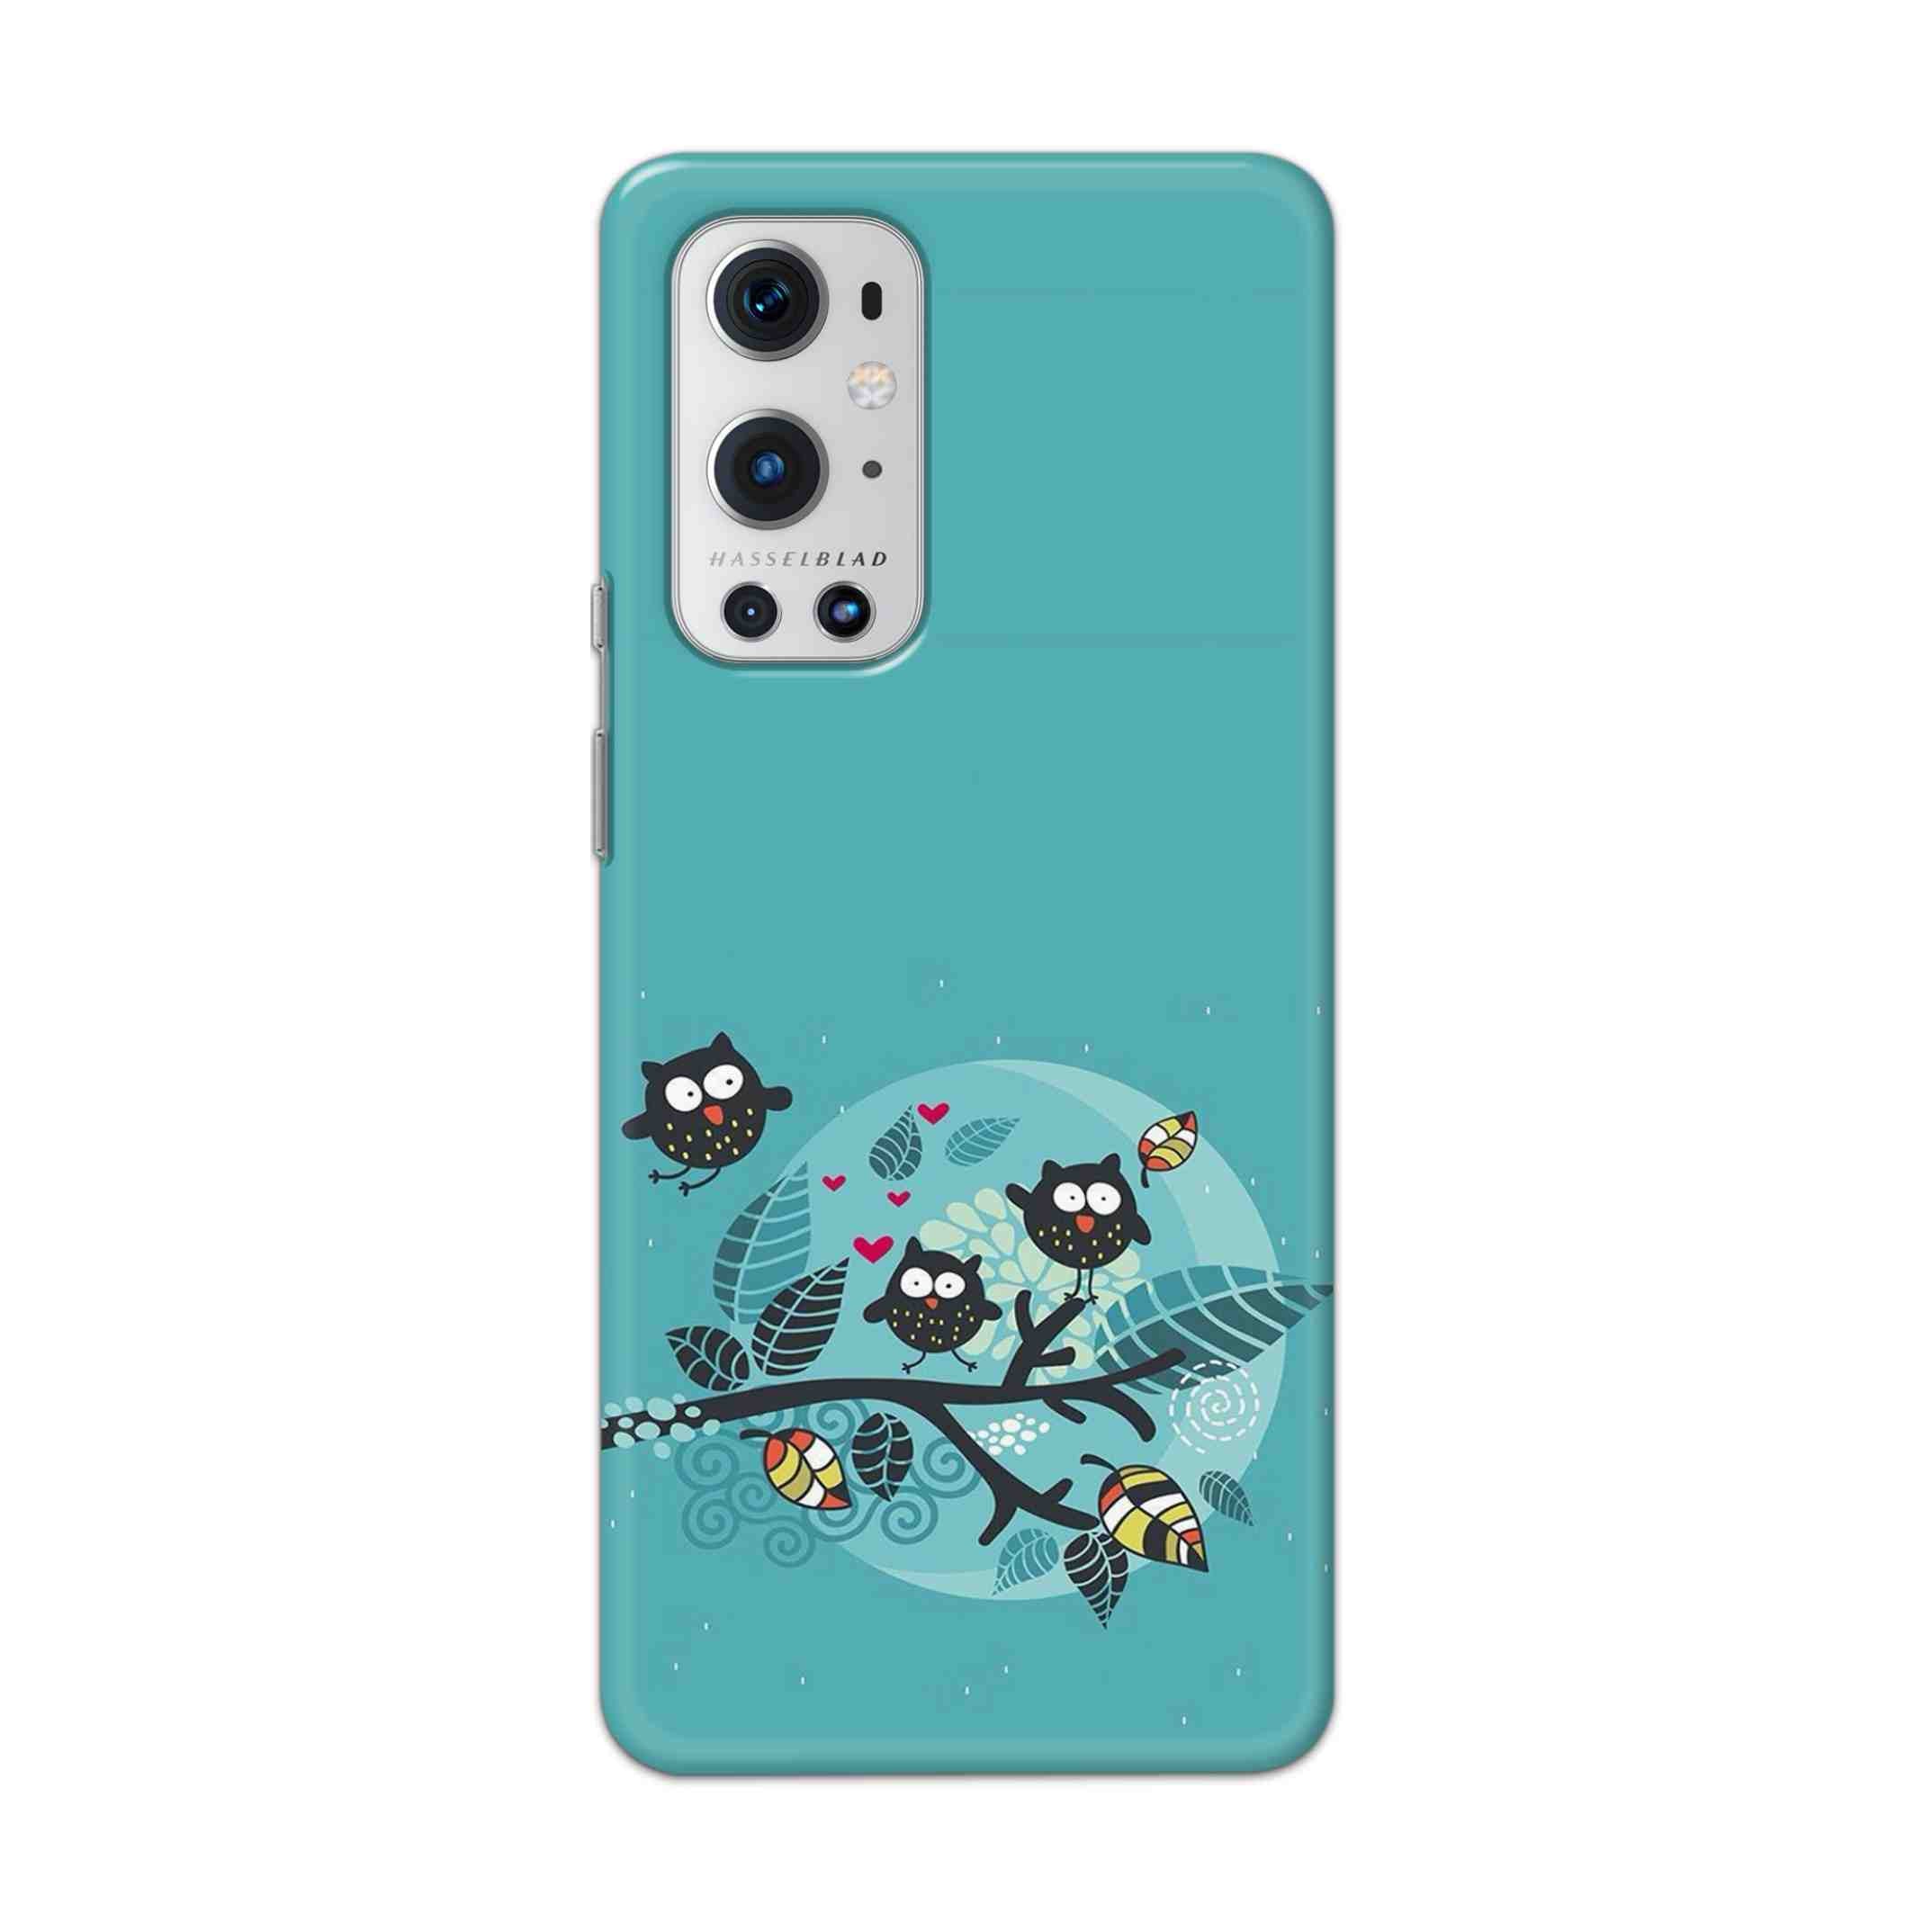 Buy Owl Hard Back Mobile Phone Case Cover For OnePlus 9 Pro Online